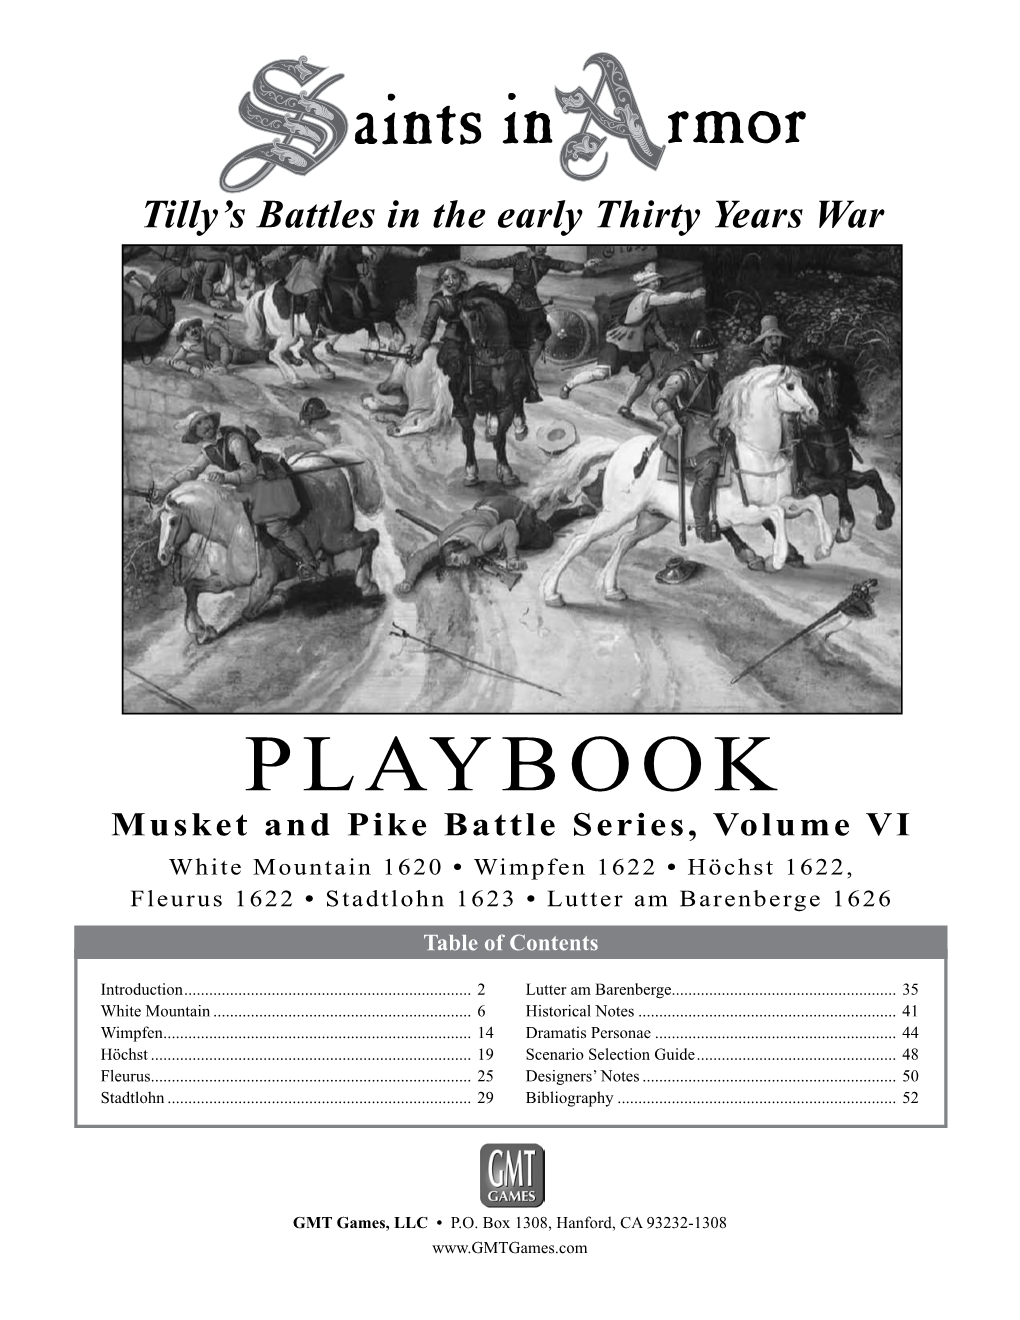 Saints in Armor ~ Playbook General Information: All Scenarios Throughout This Playbook Use the Following In- Formation